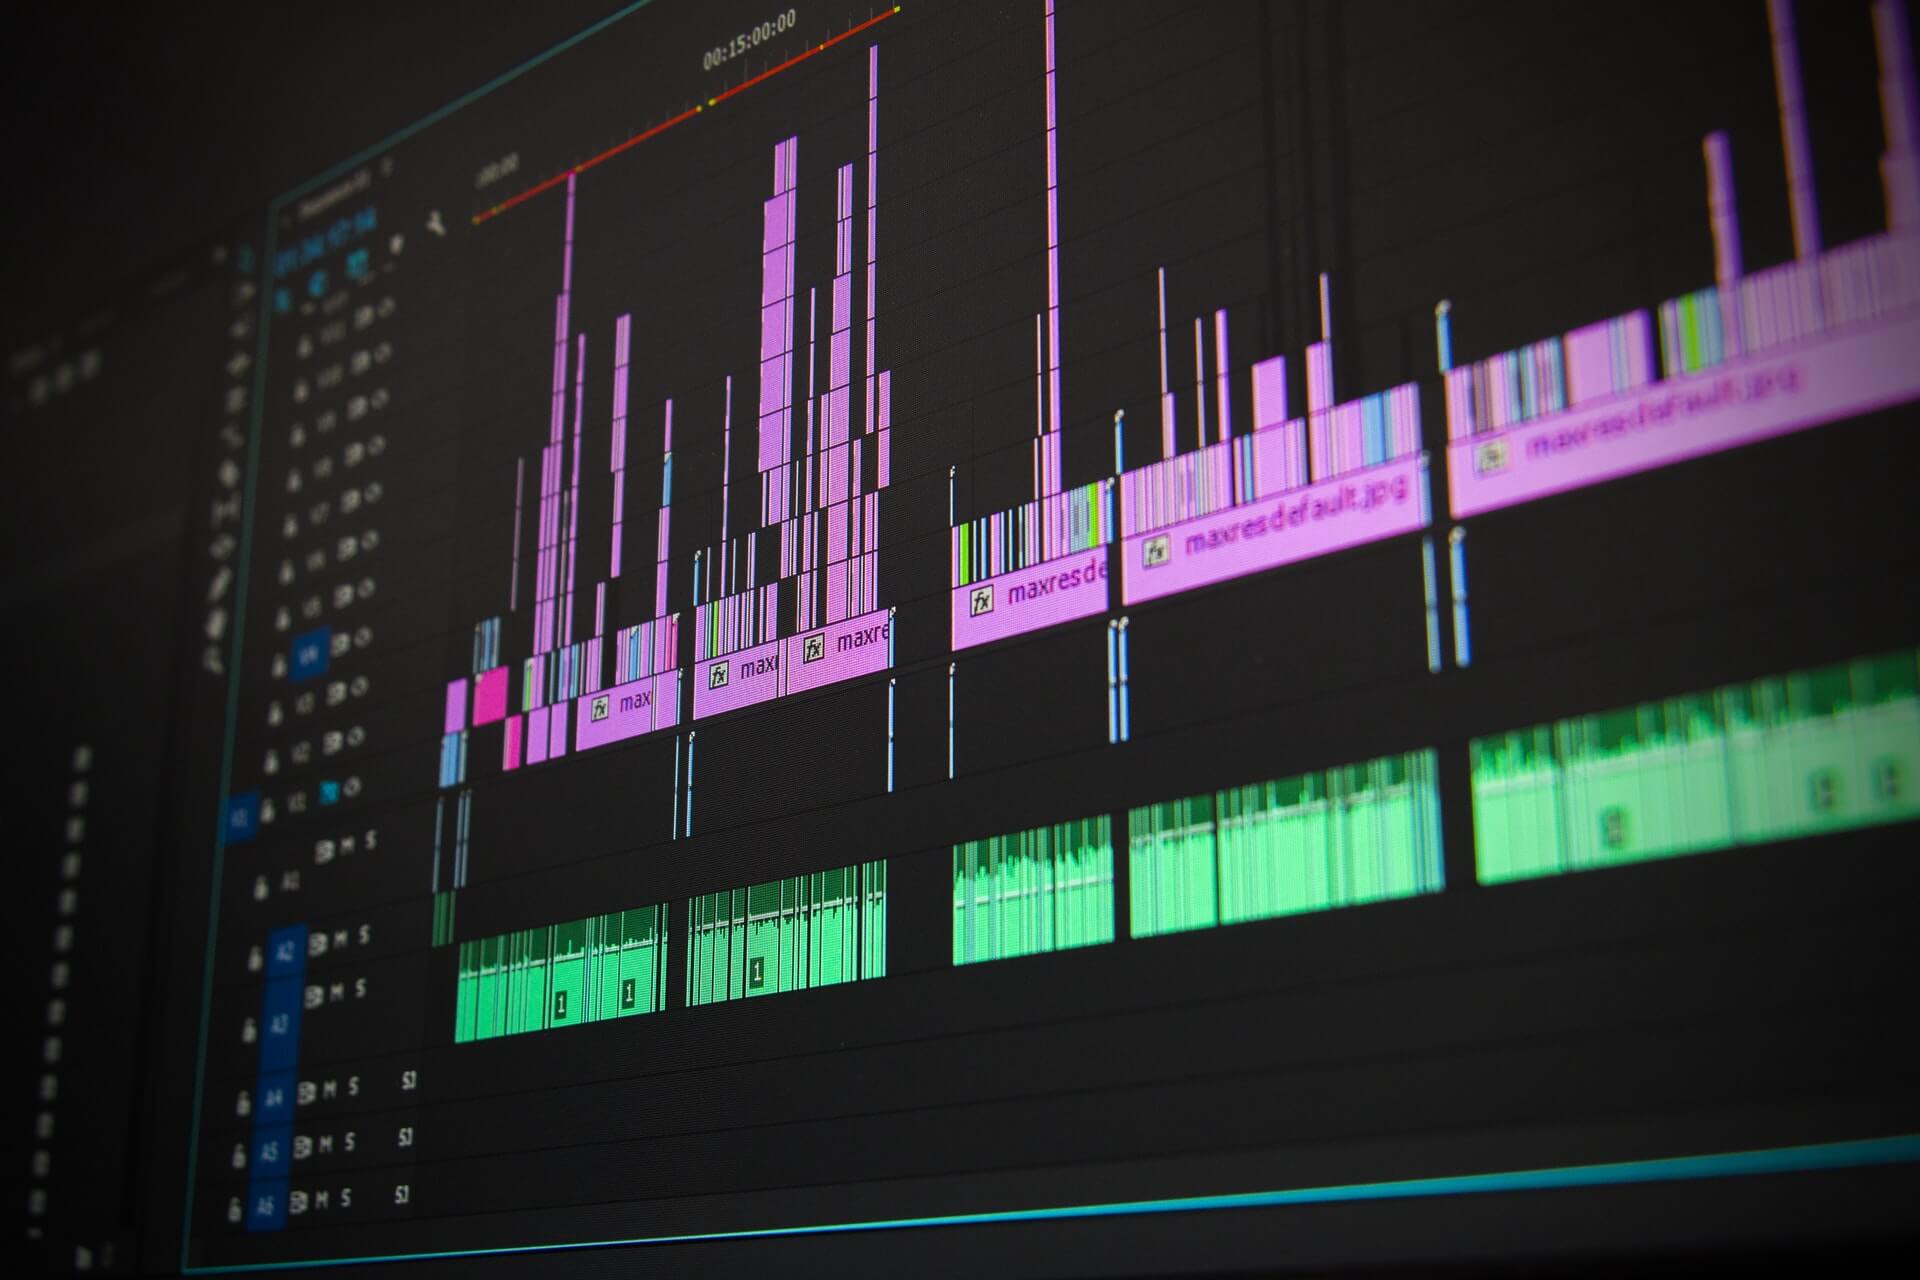 The best video editing software in 2022 – Ultimate Guide